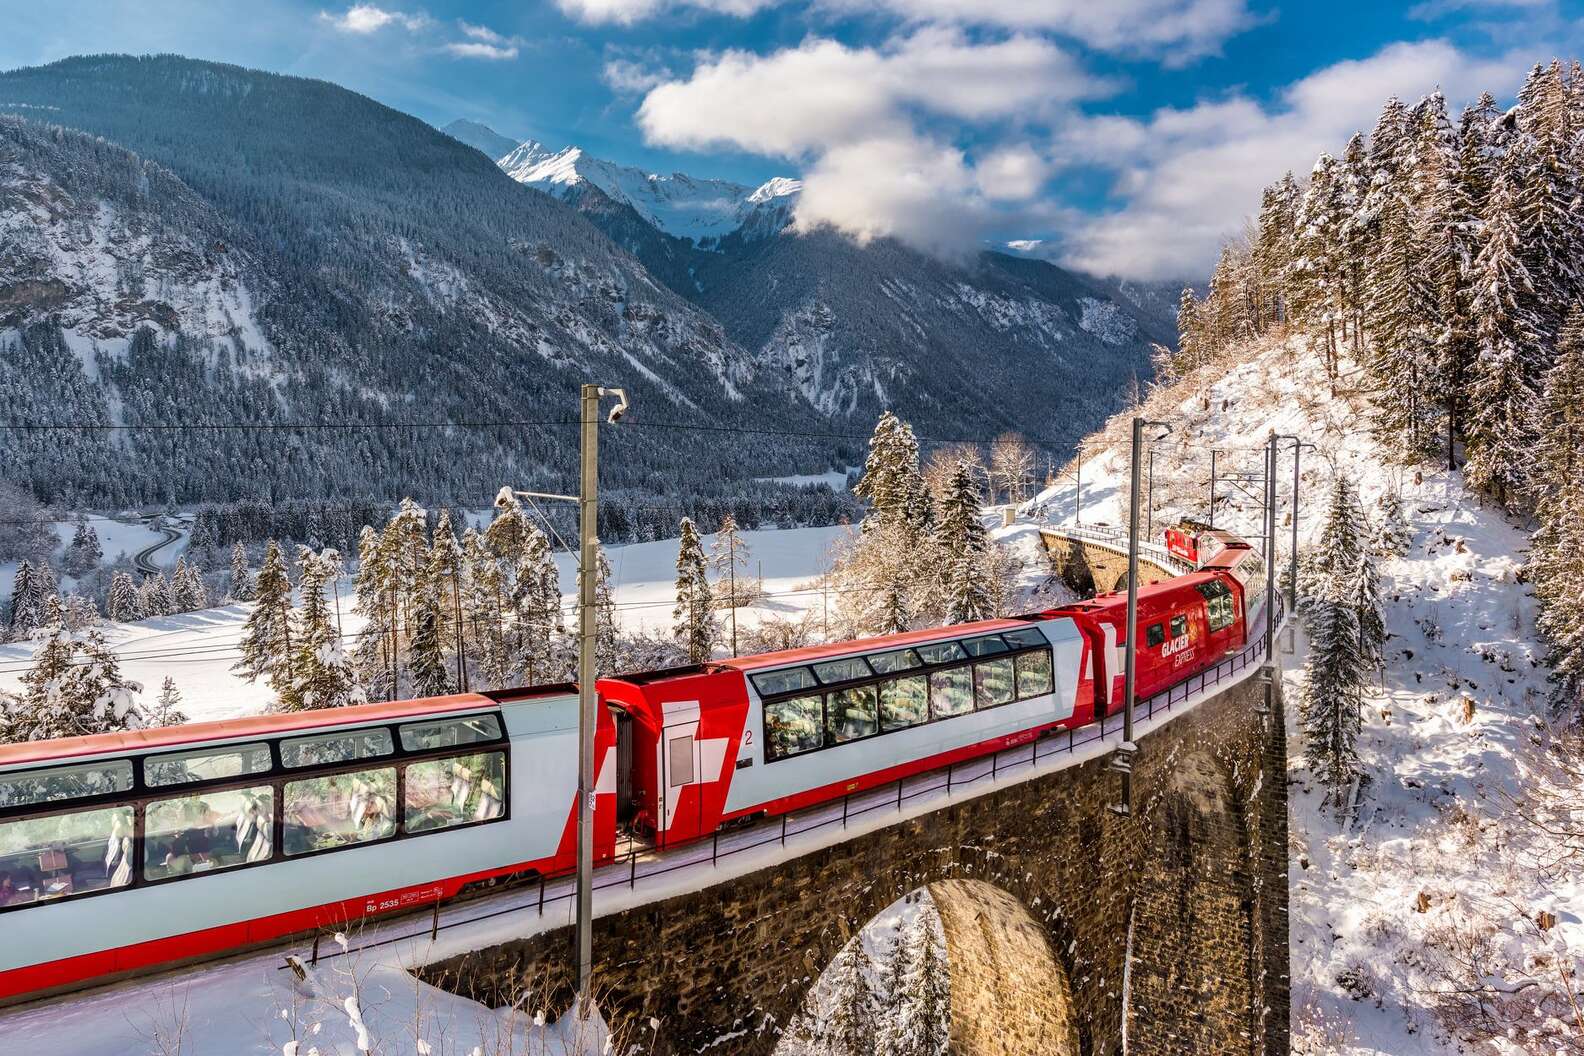 The Glacier Express: Switzerland's Train With a View - Unusual Places